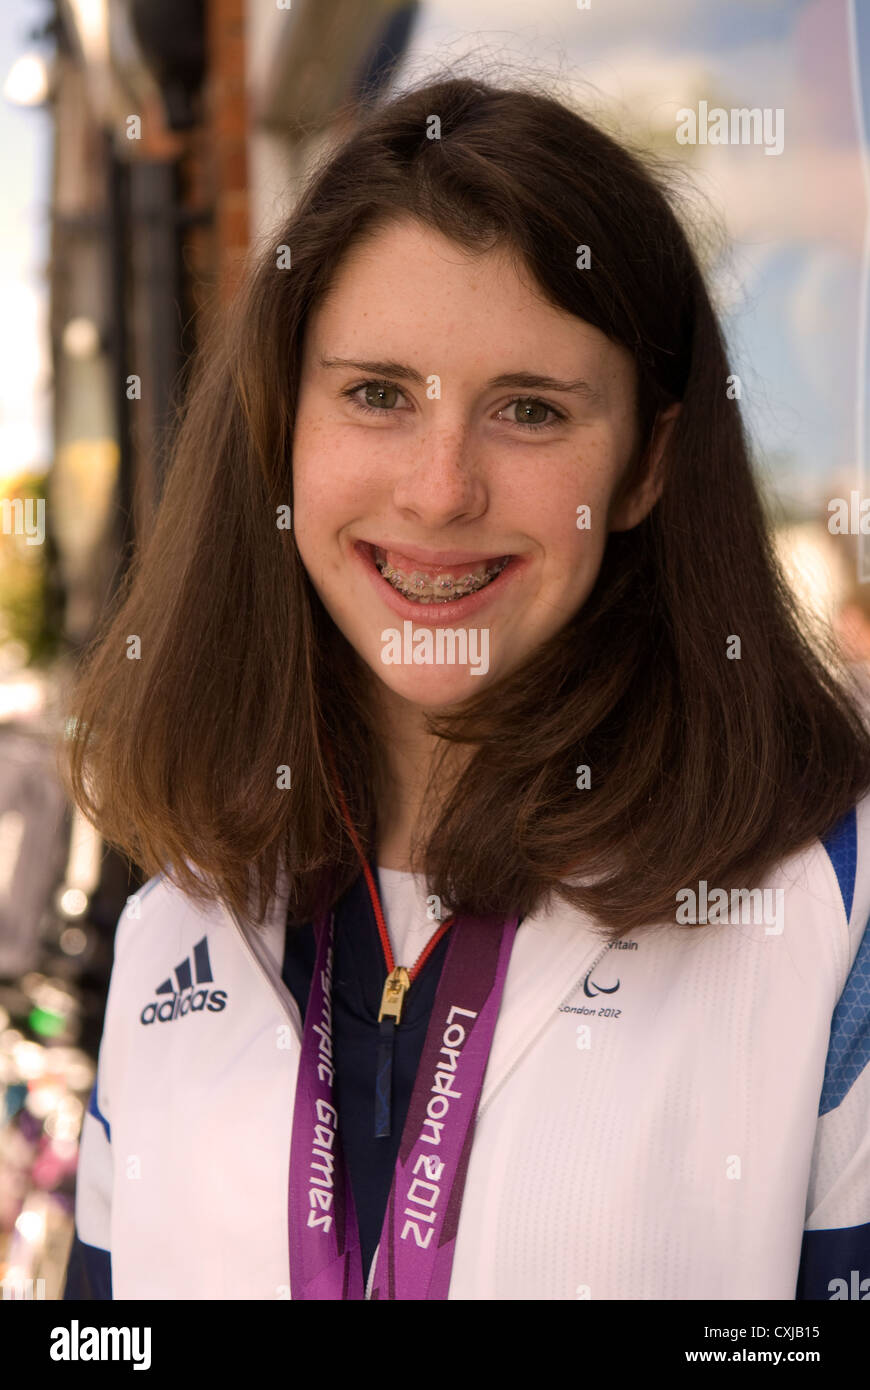 Olivia Breen, Bronze Paralympic medal winner at London 2012 Olympic games. Stock Photo